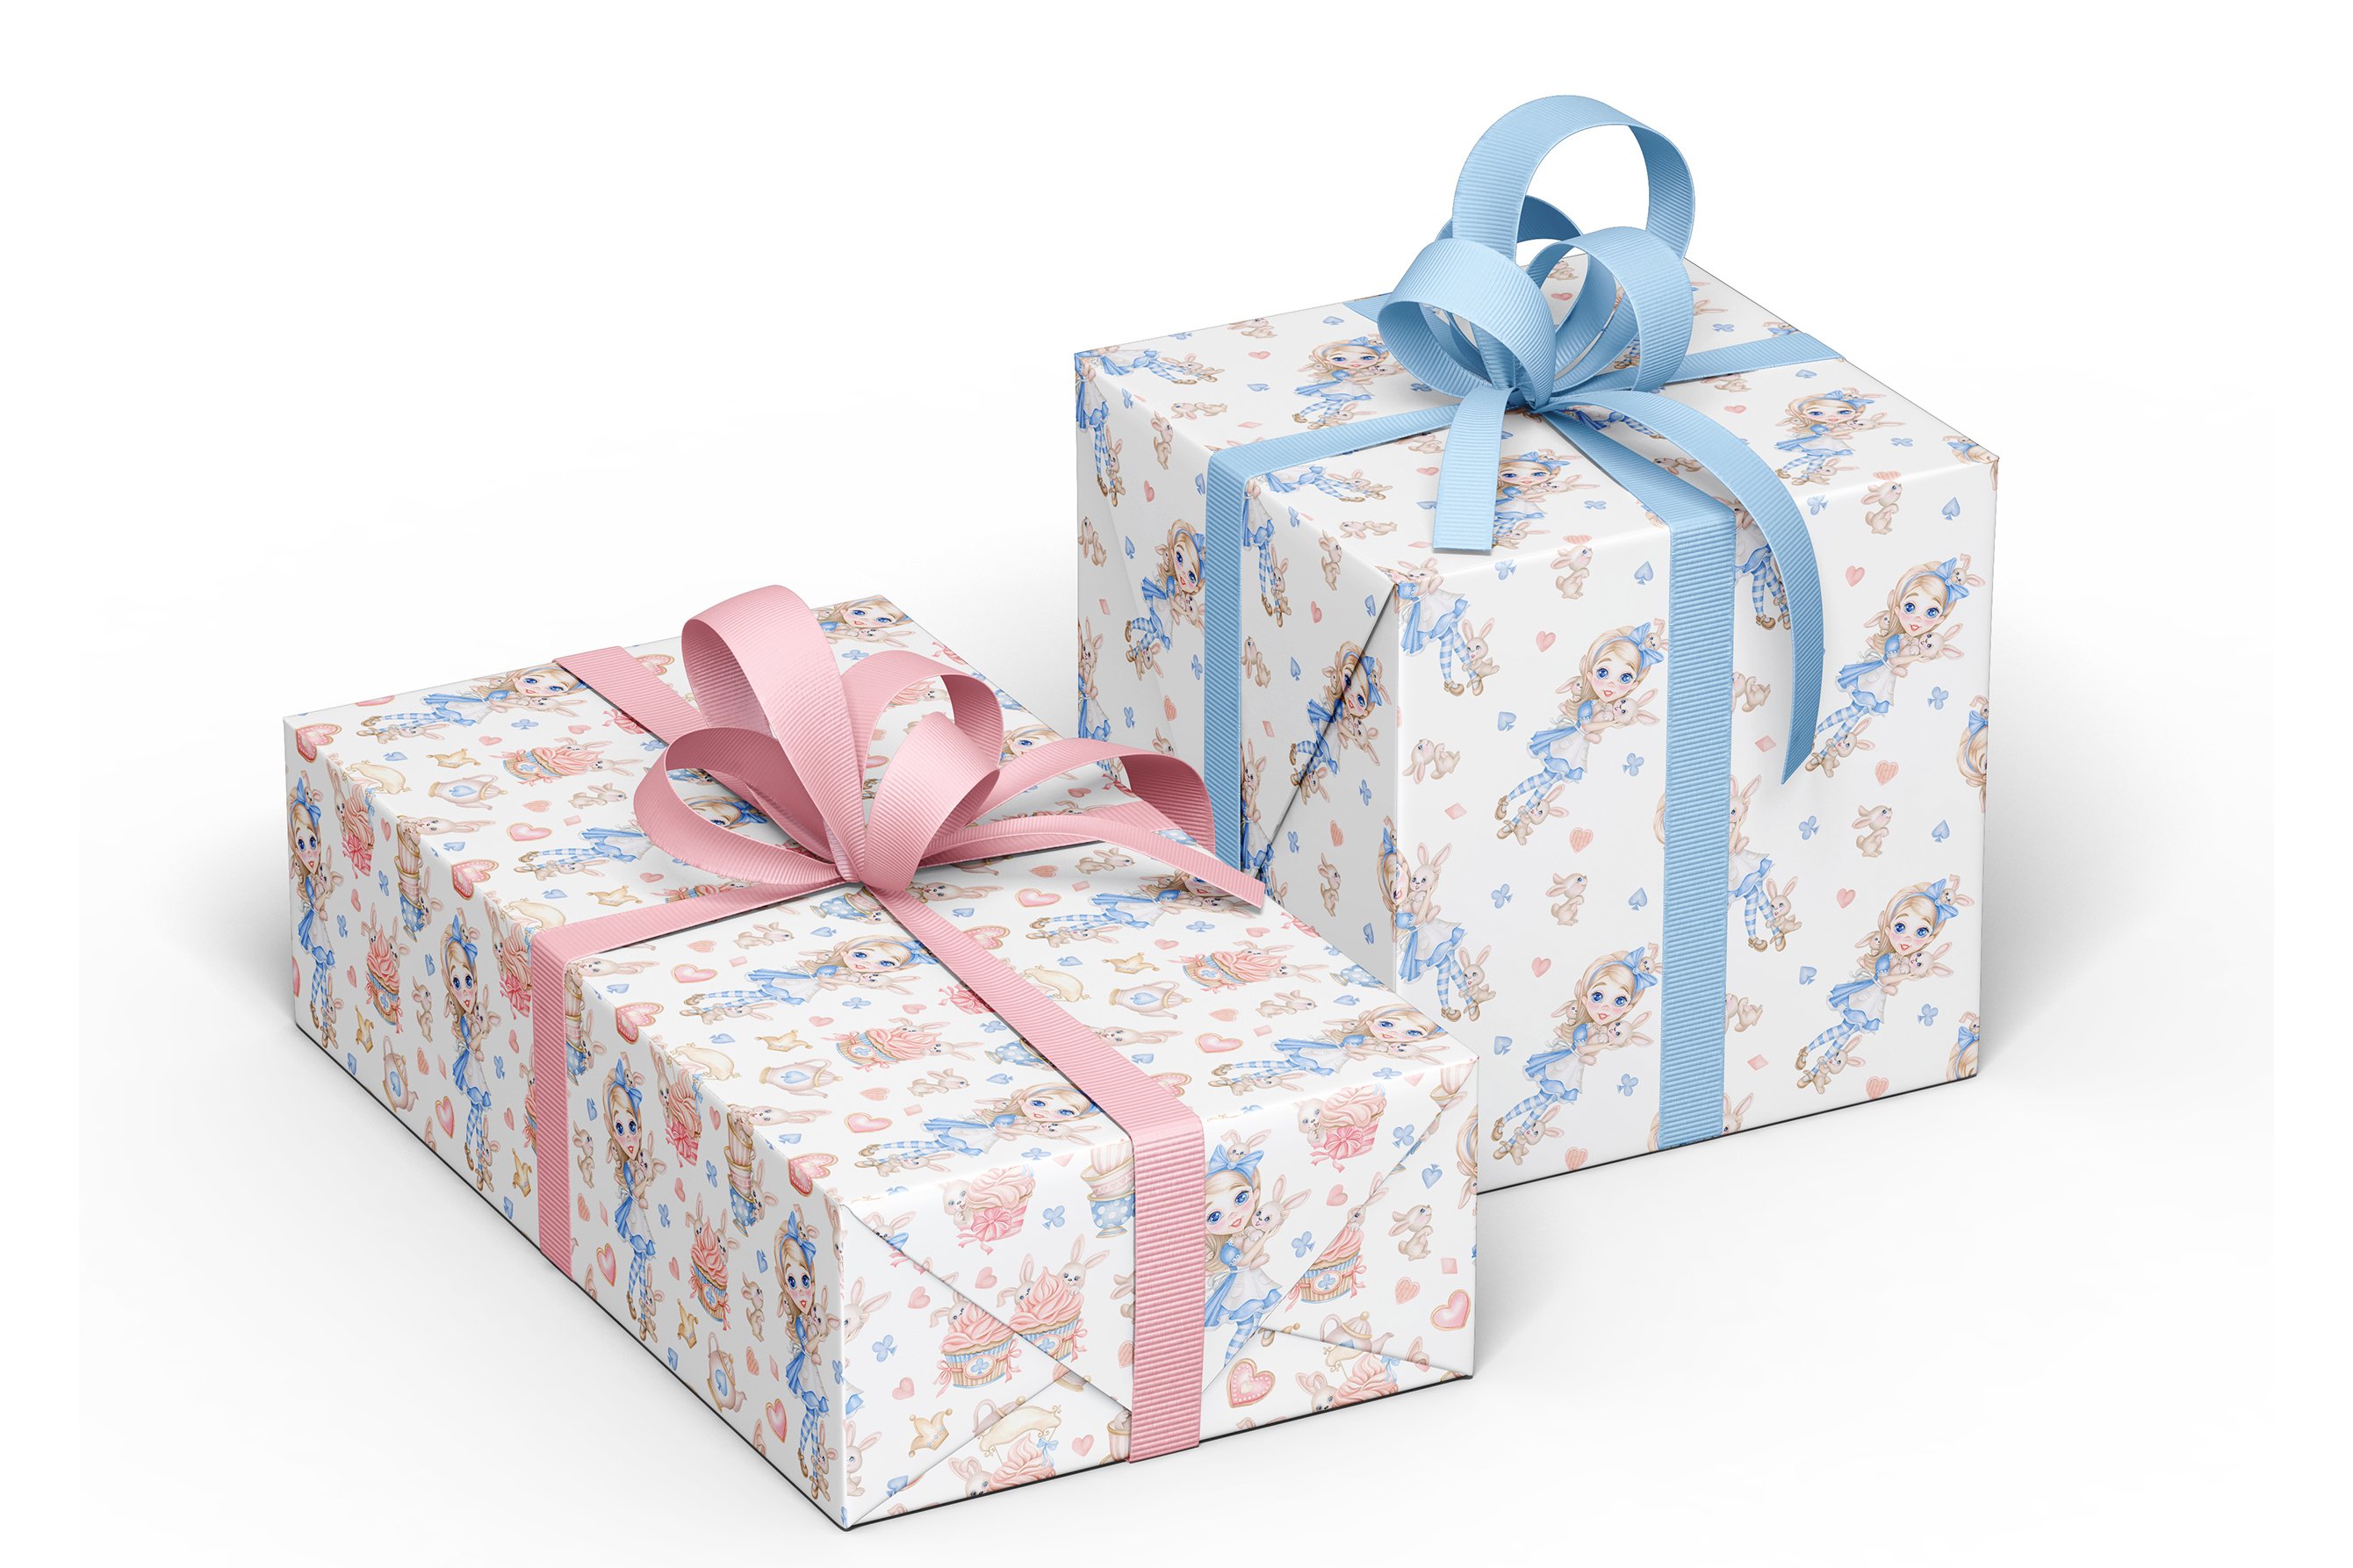 Gifts with paper on the theme of fairy tales with print.